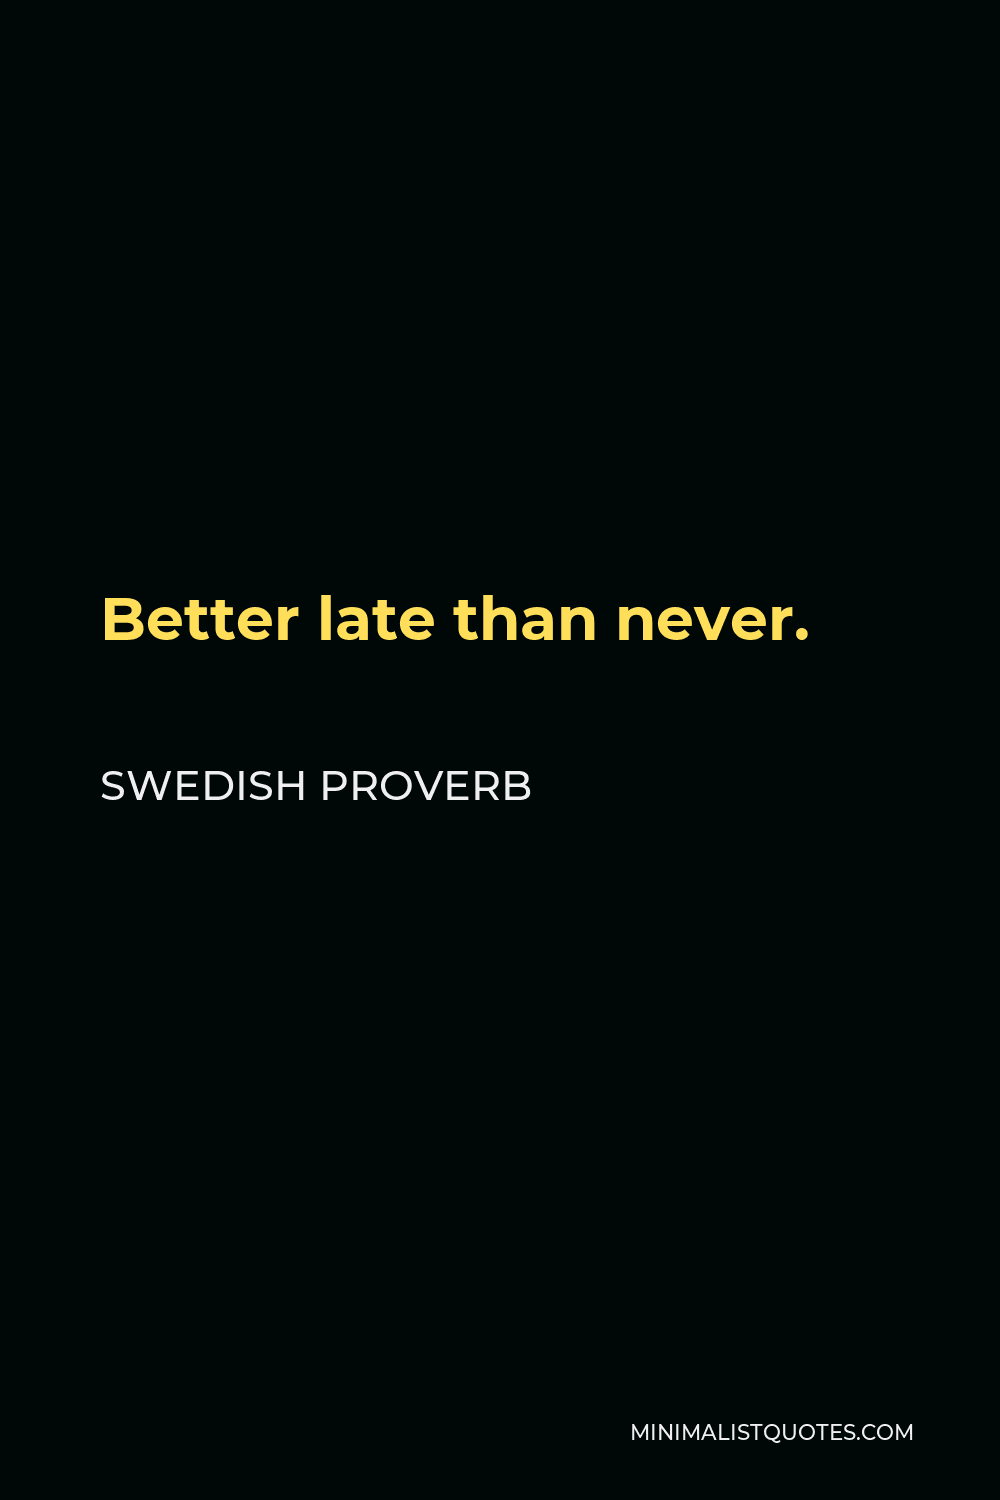 Swedish Proverb Quote - Better late than never.